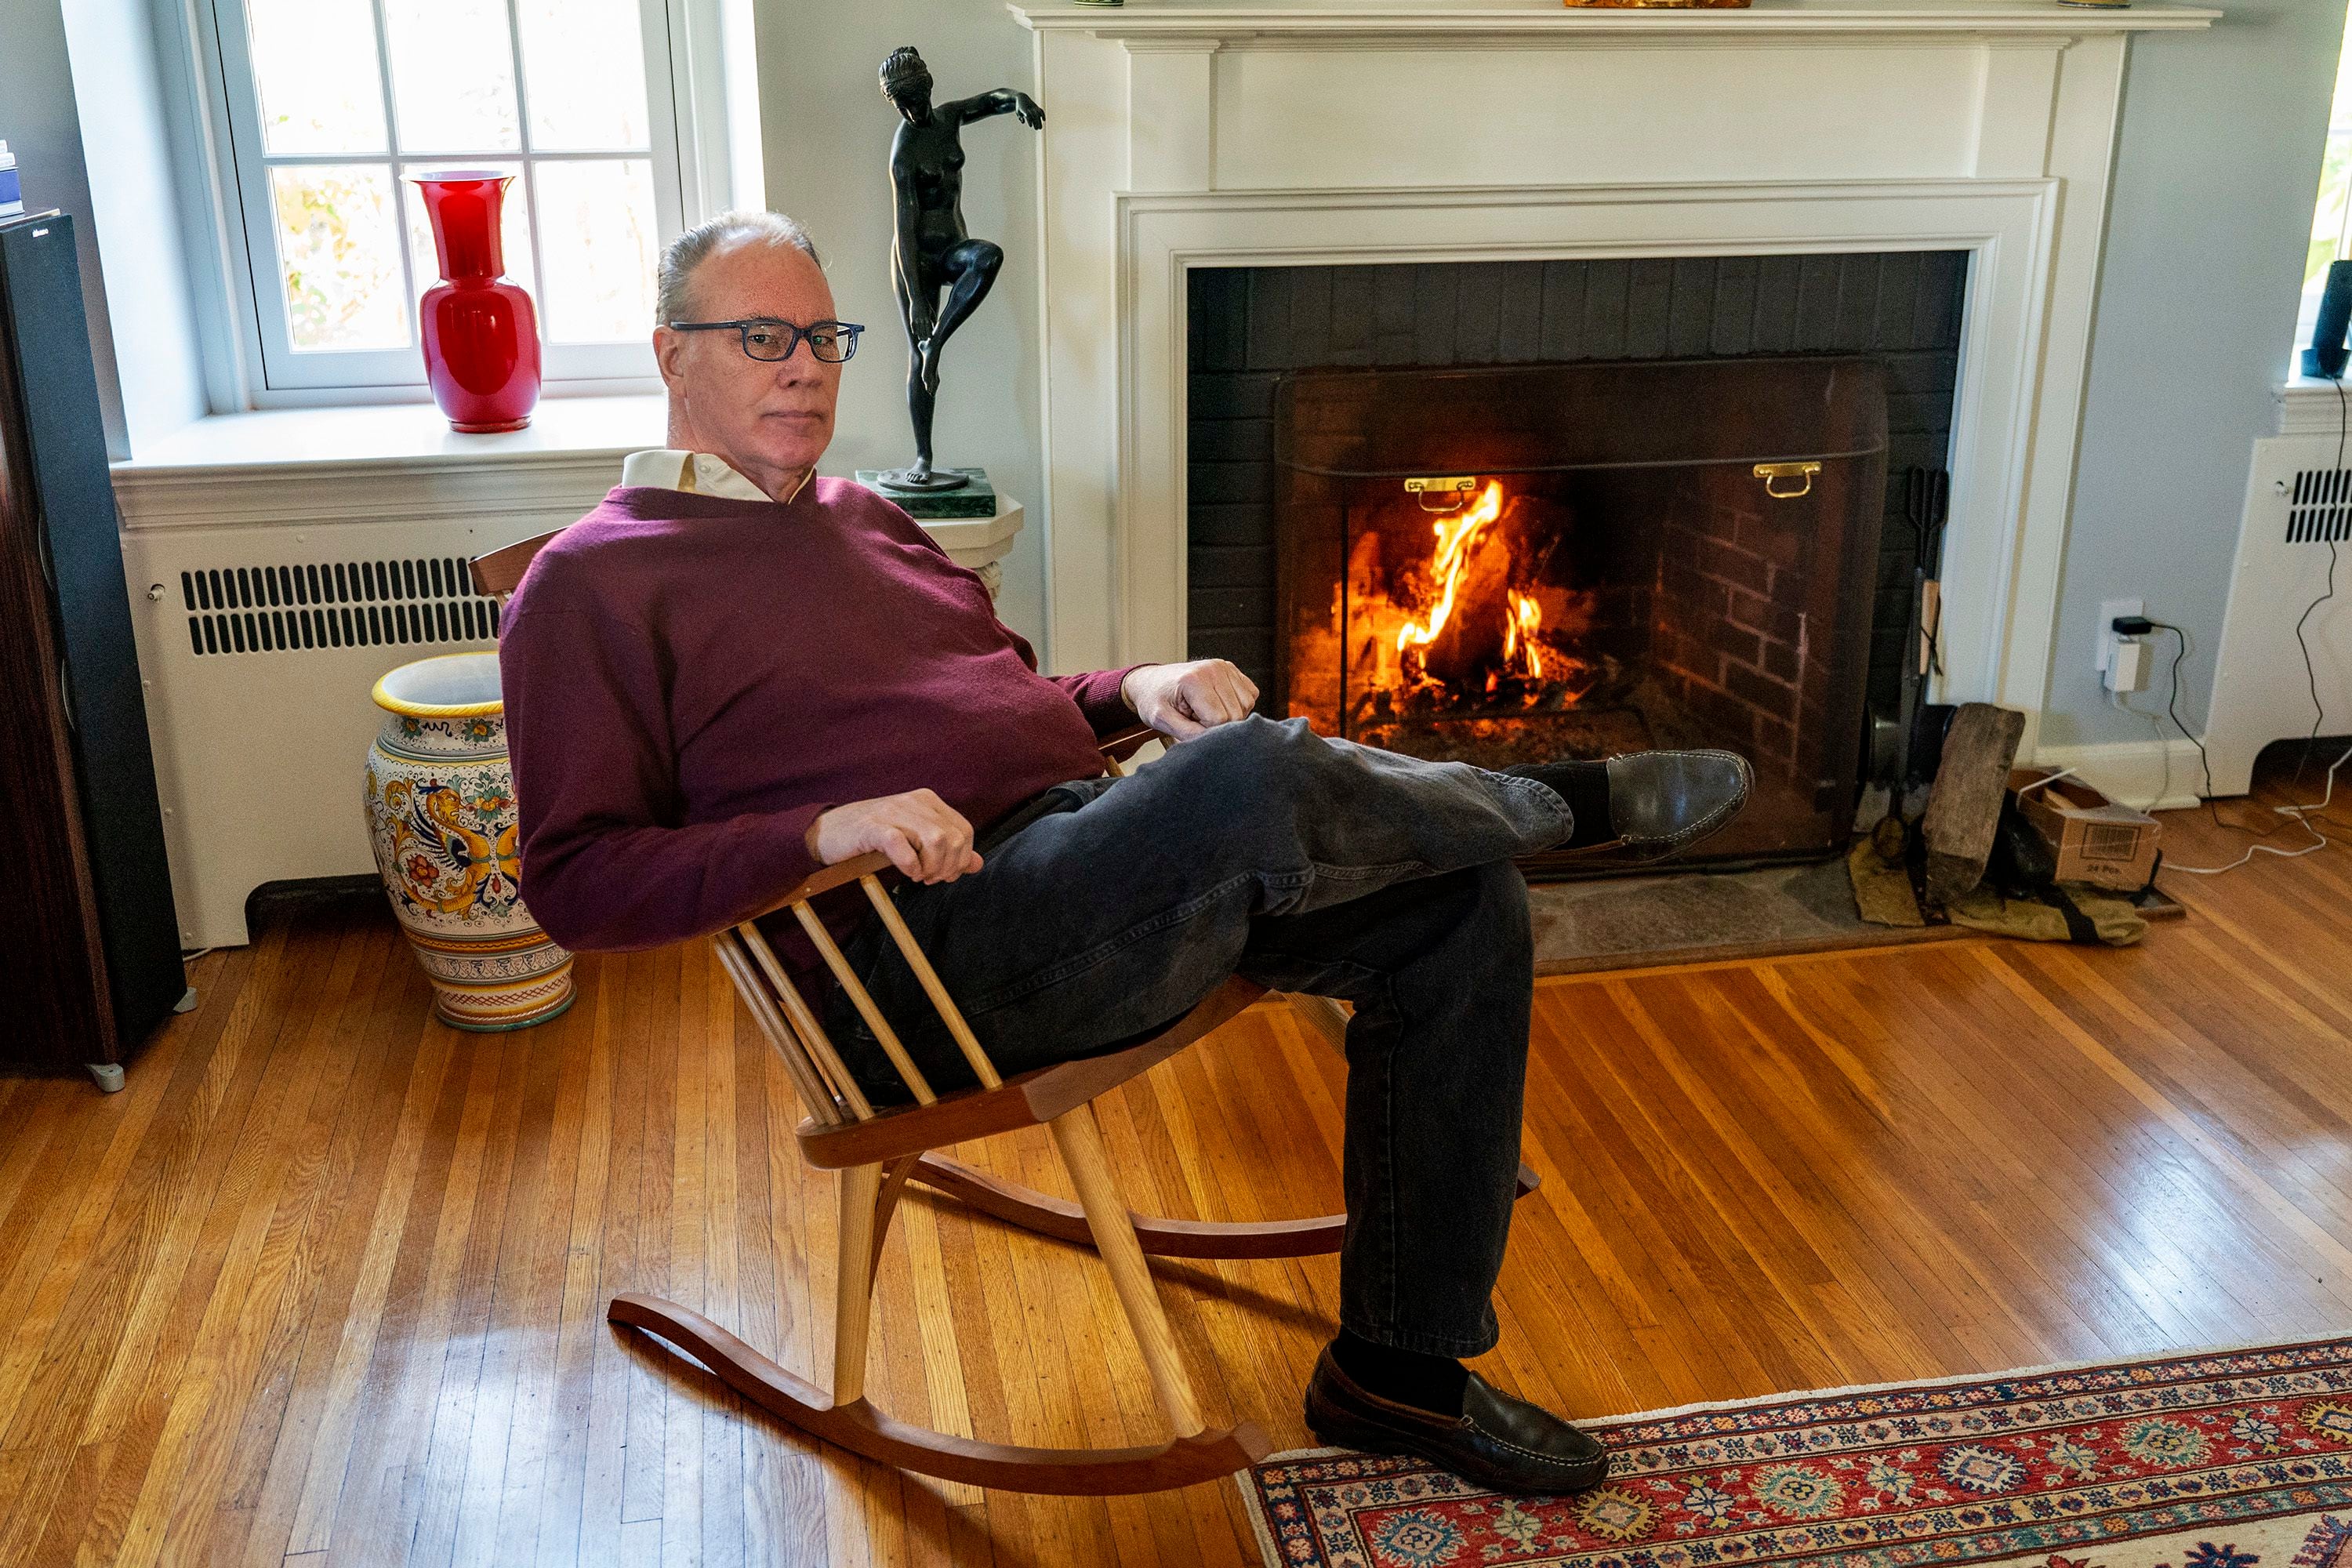 What Are the Dangers of Sitting in Front of a Fireplace?